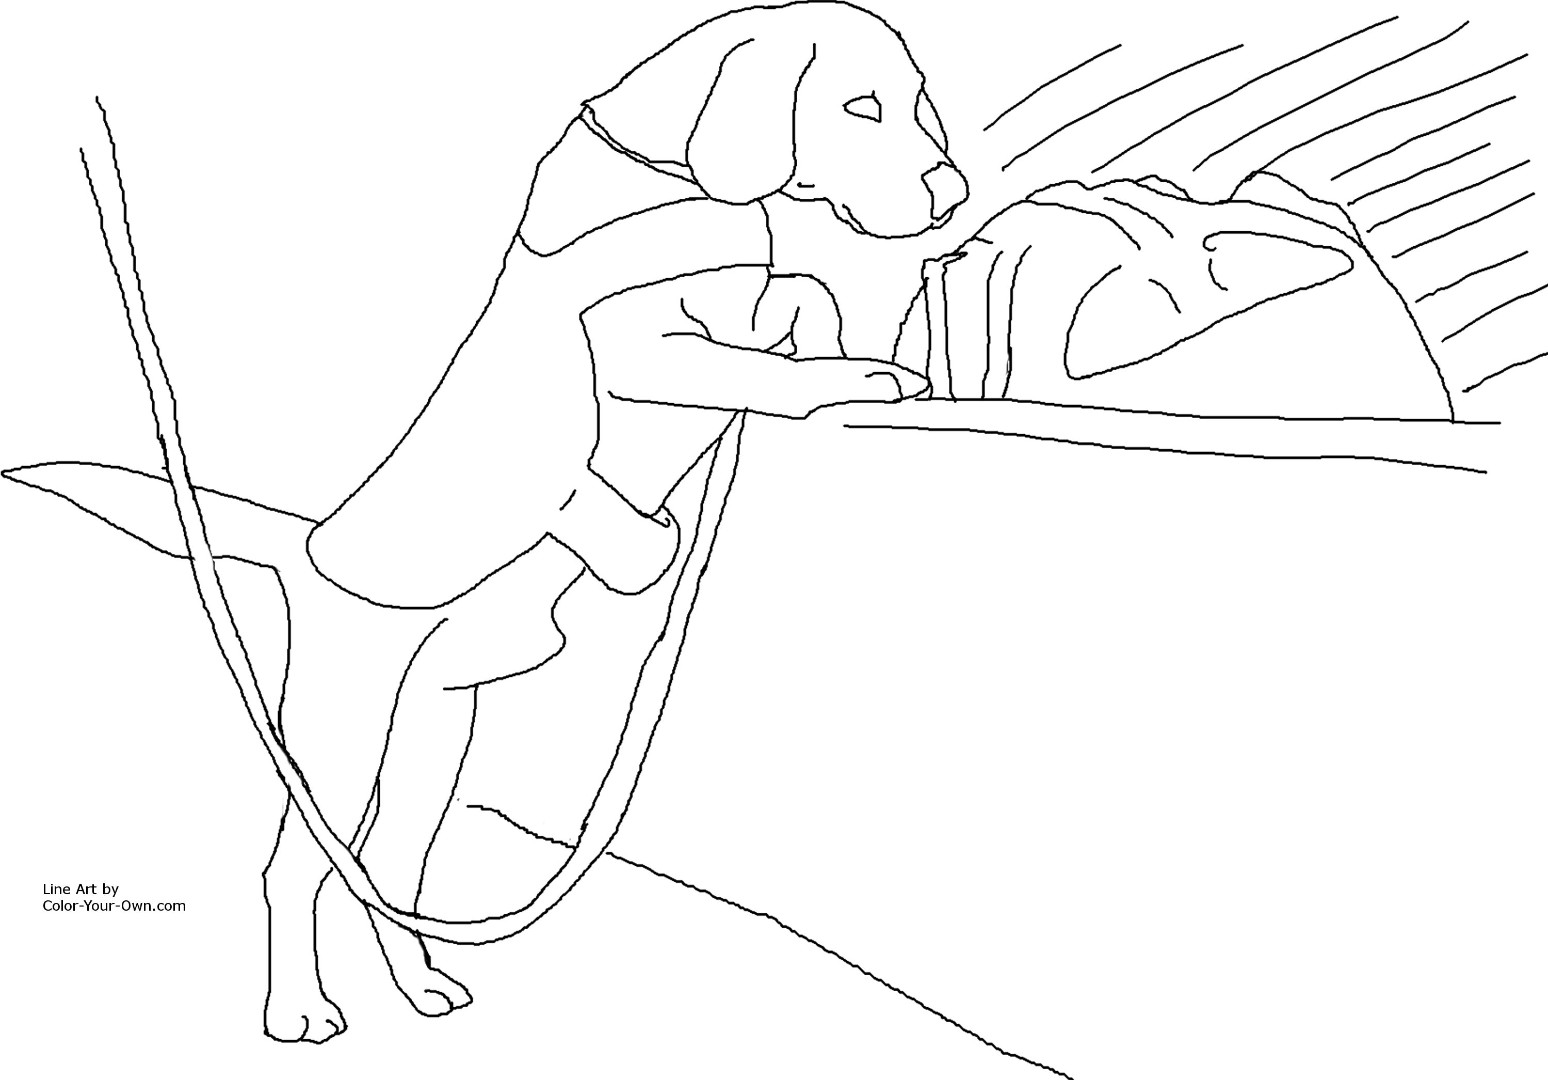 Beagle coloring pages to download and print for free